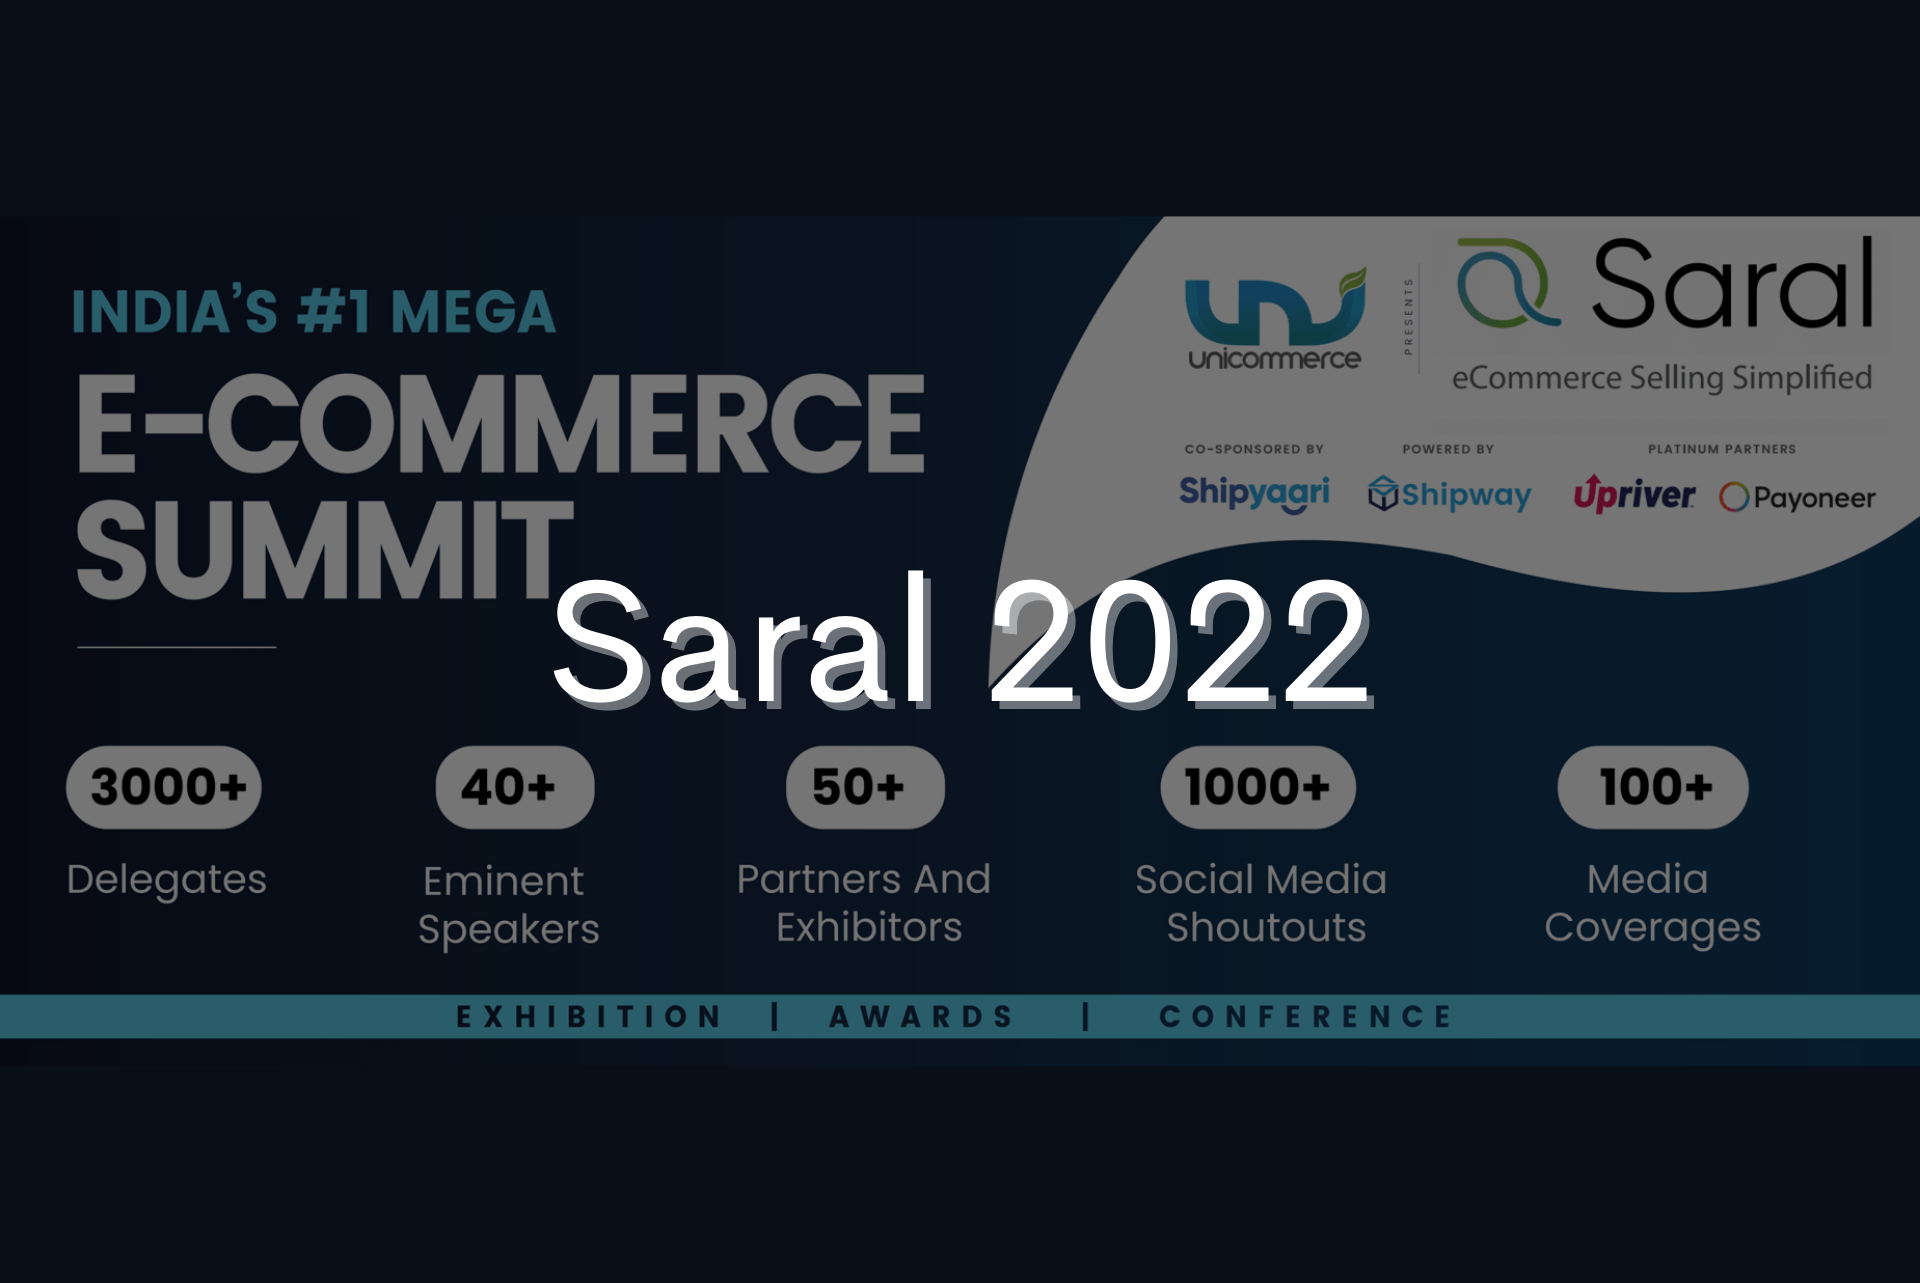 unicommerce's events - saral 2022